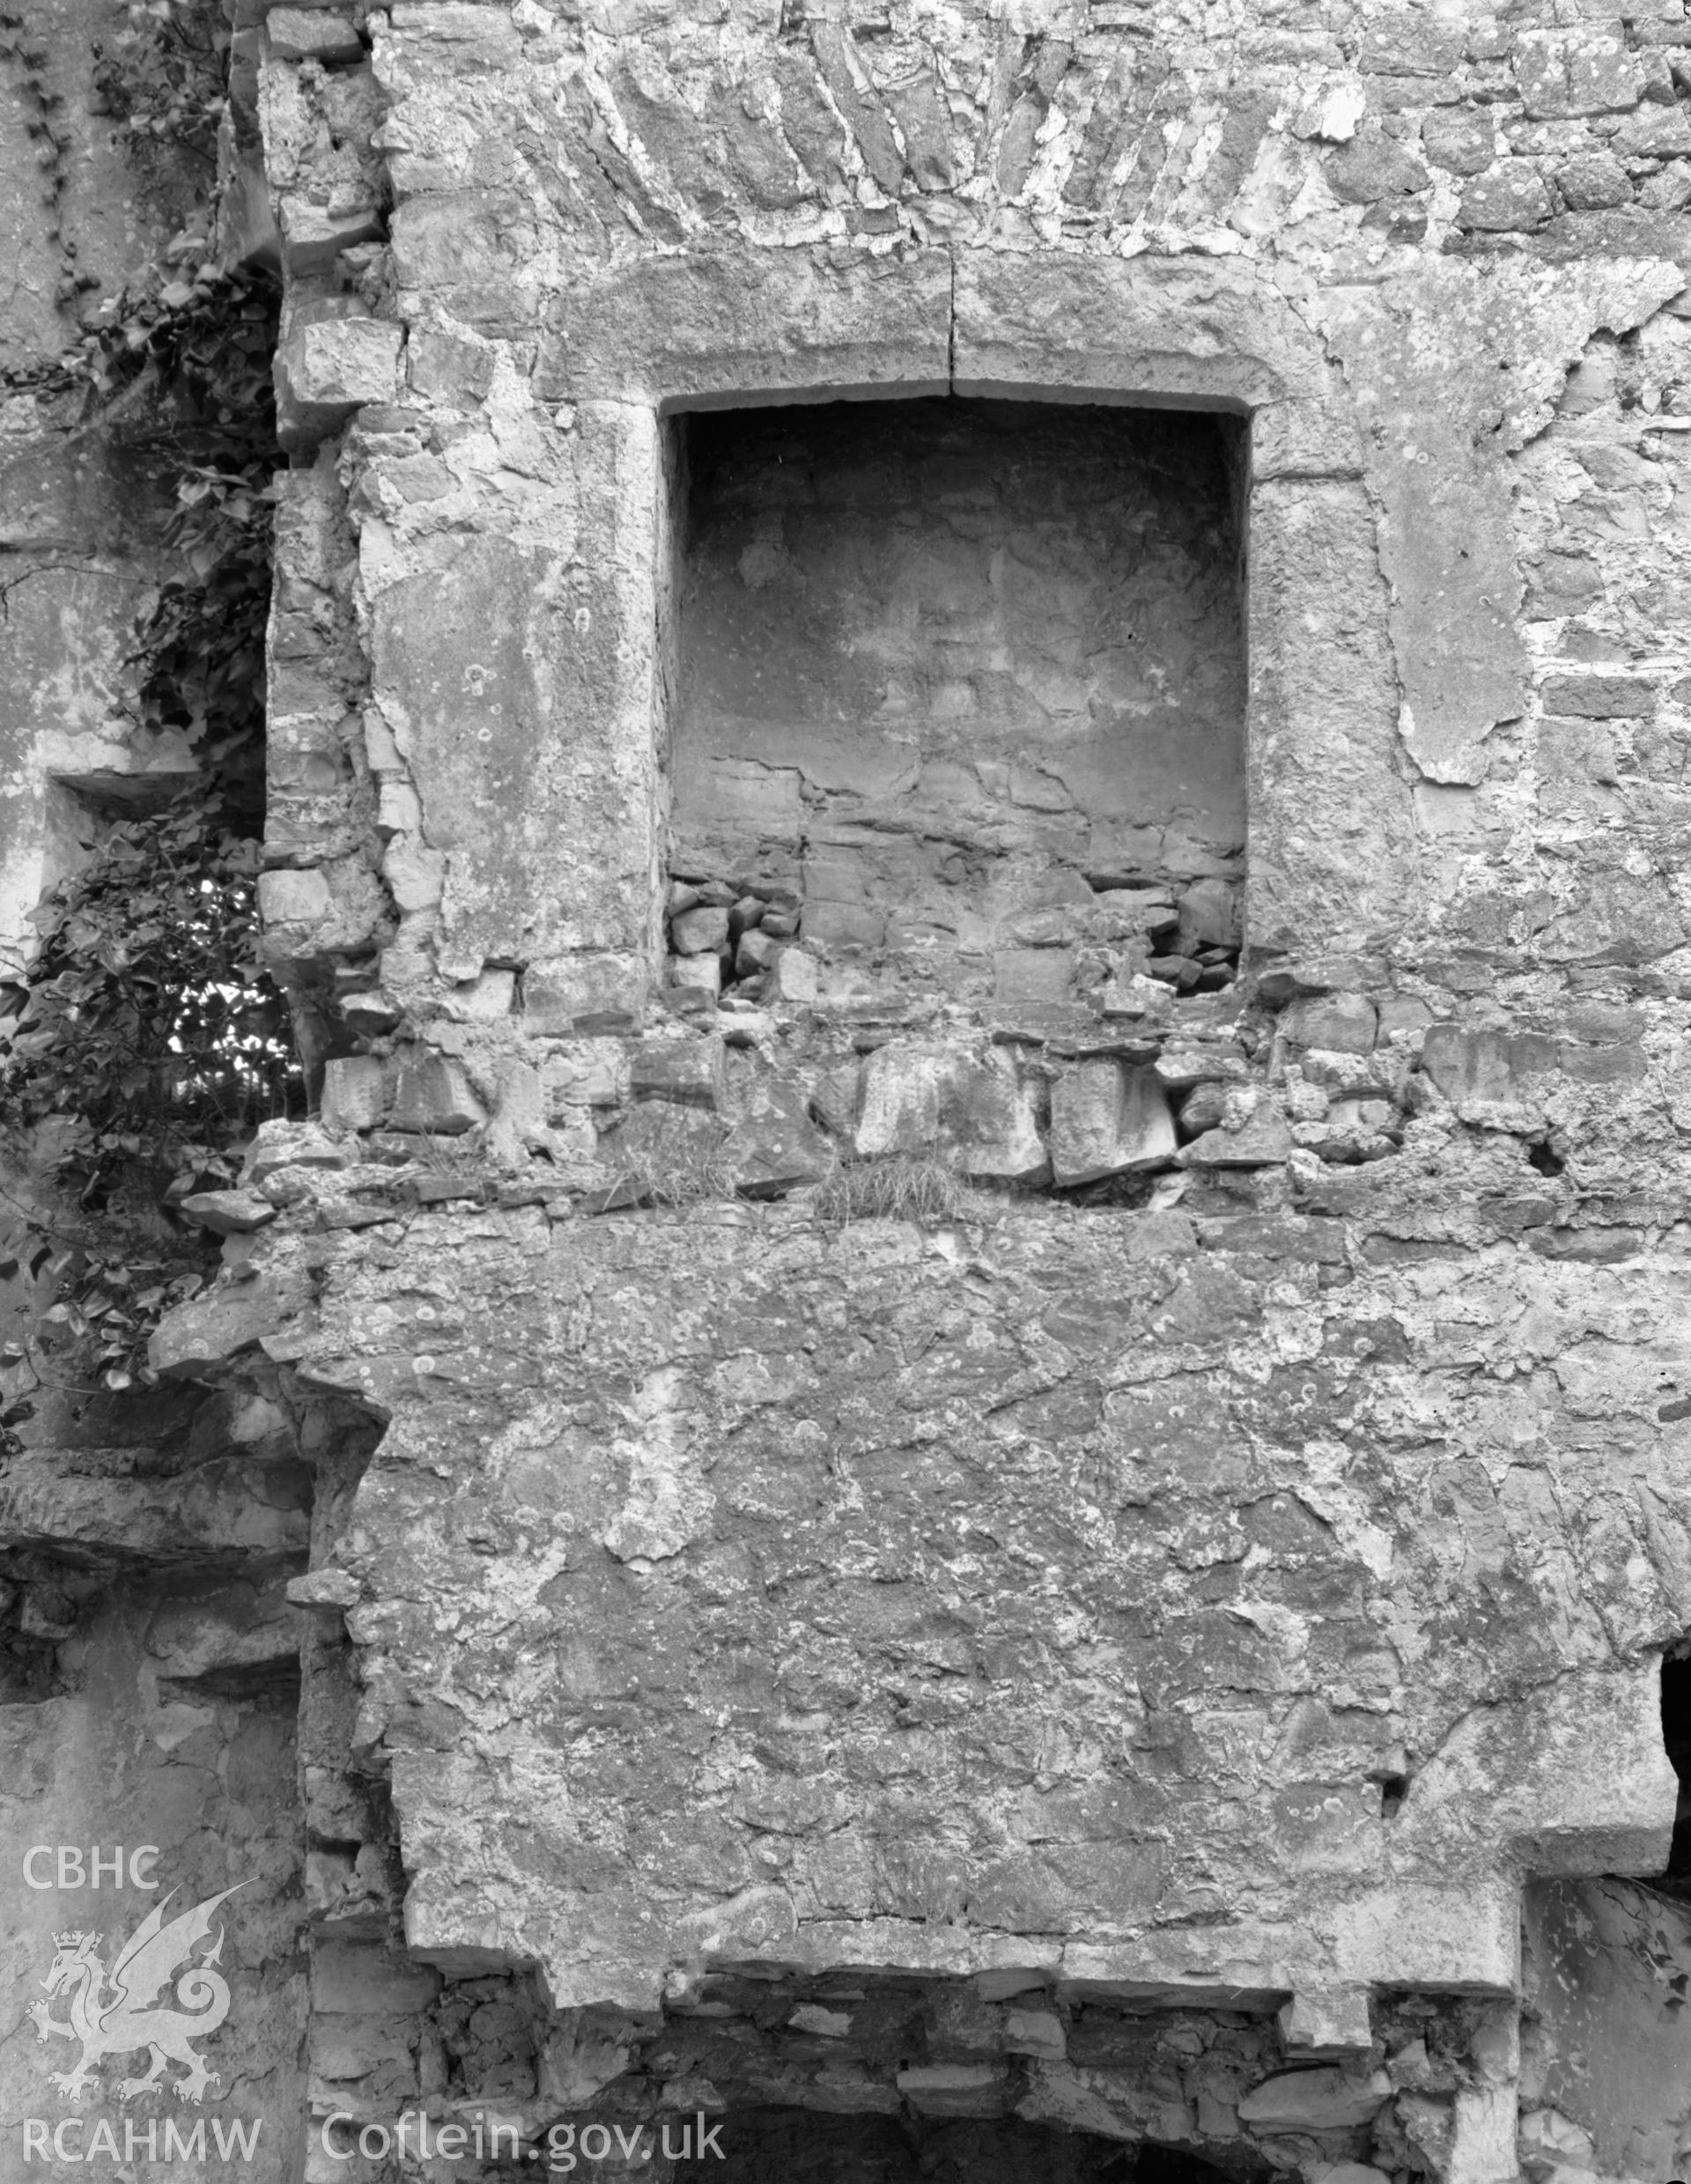 View of fireplace at Ogmore Castle, St Brides Major taken 05.04.65.